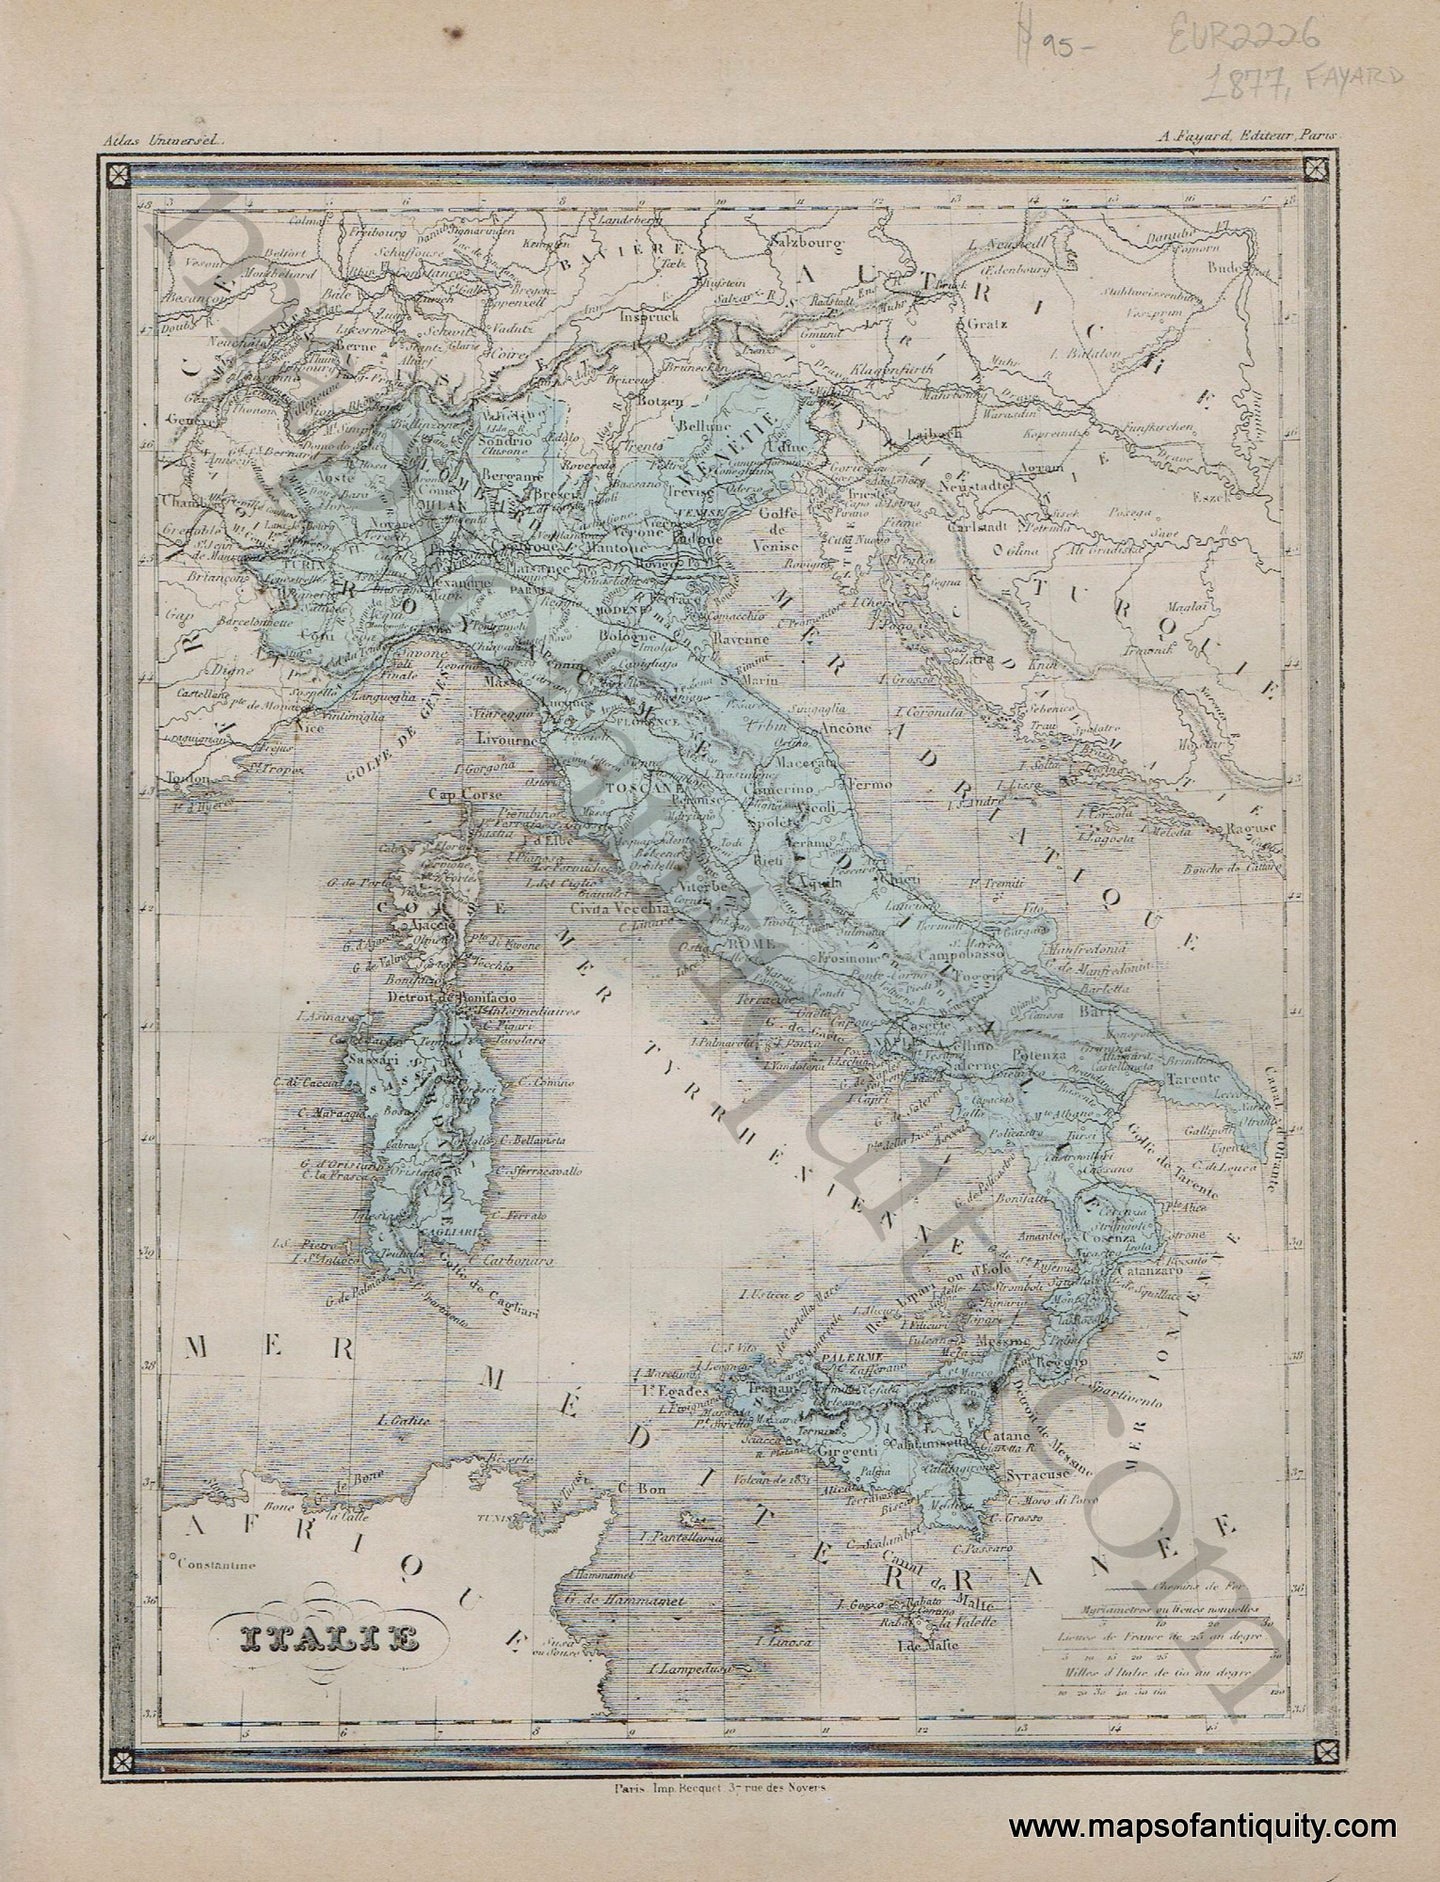 Antique-Map-Italie-Italy-Country-Fayard-Atlas-Universel-French-1877-1870s-1800s-Mid-Late-19th-Century-Maps-of-Antiquity